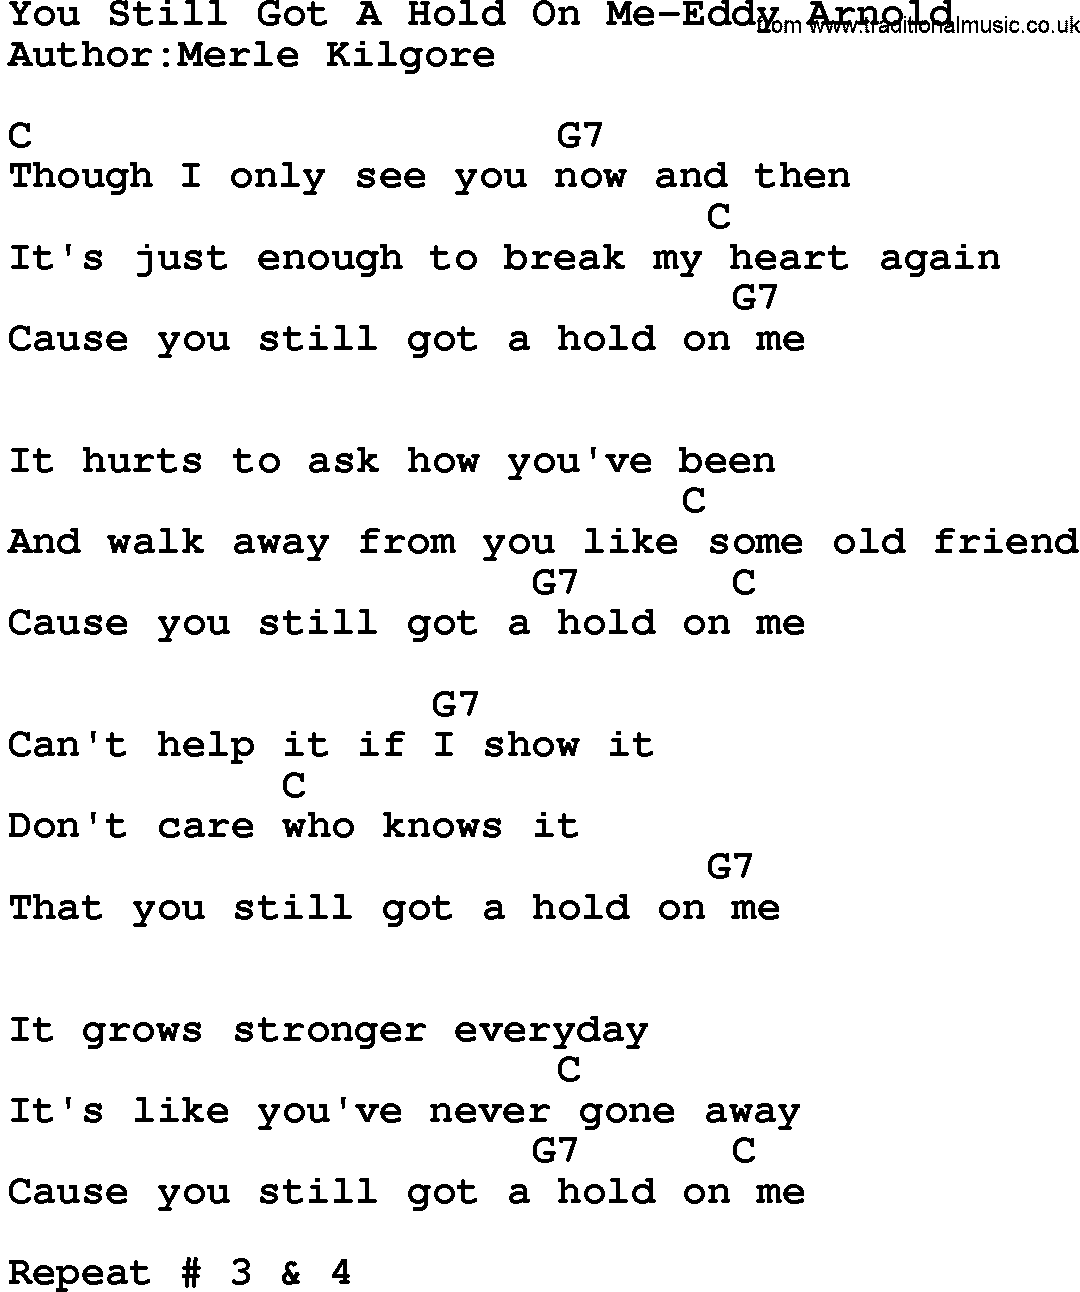 Country music song: You Still Got A Hold On Me-Eddy Arnold lyrics and chords